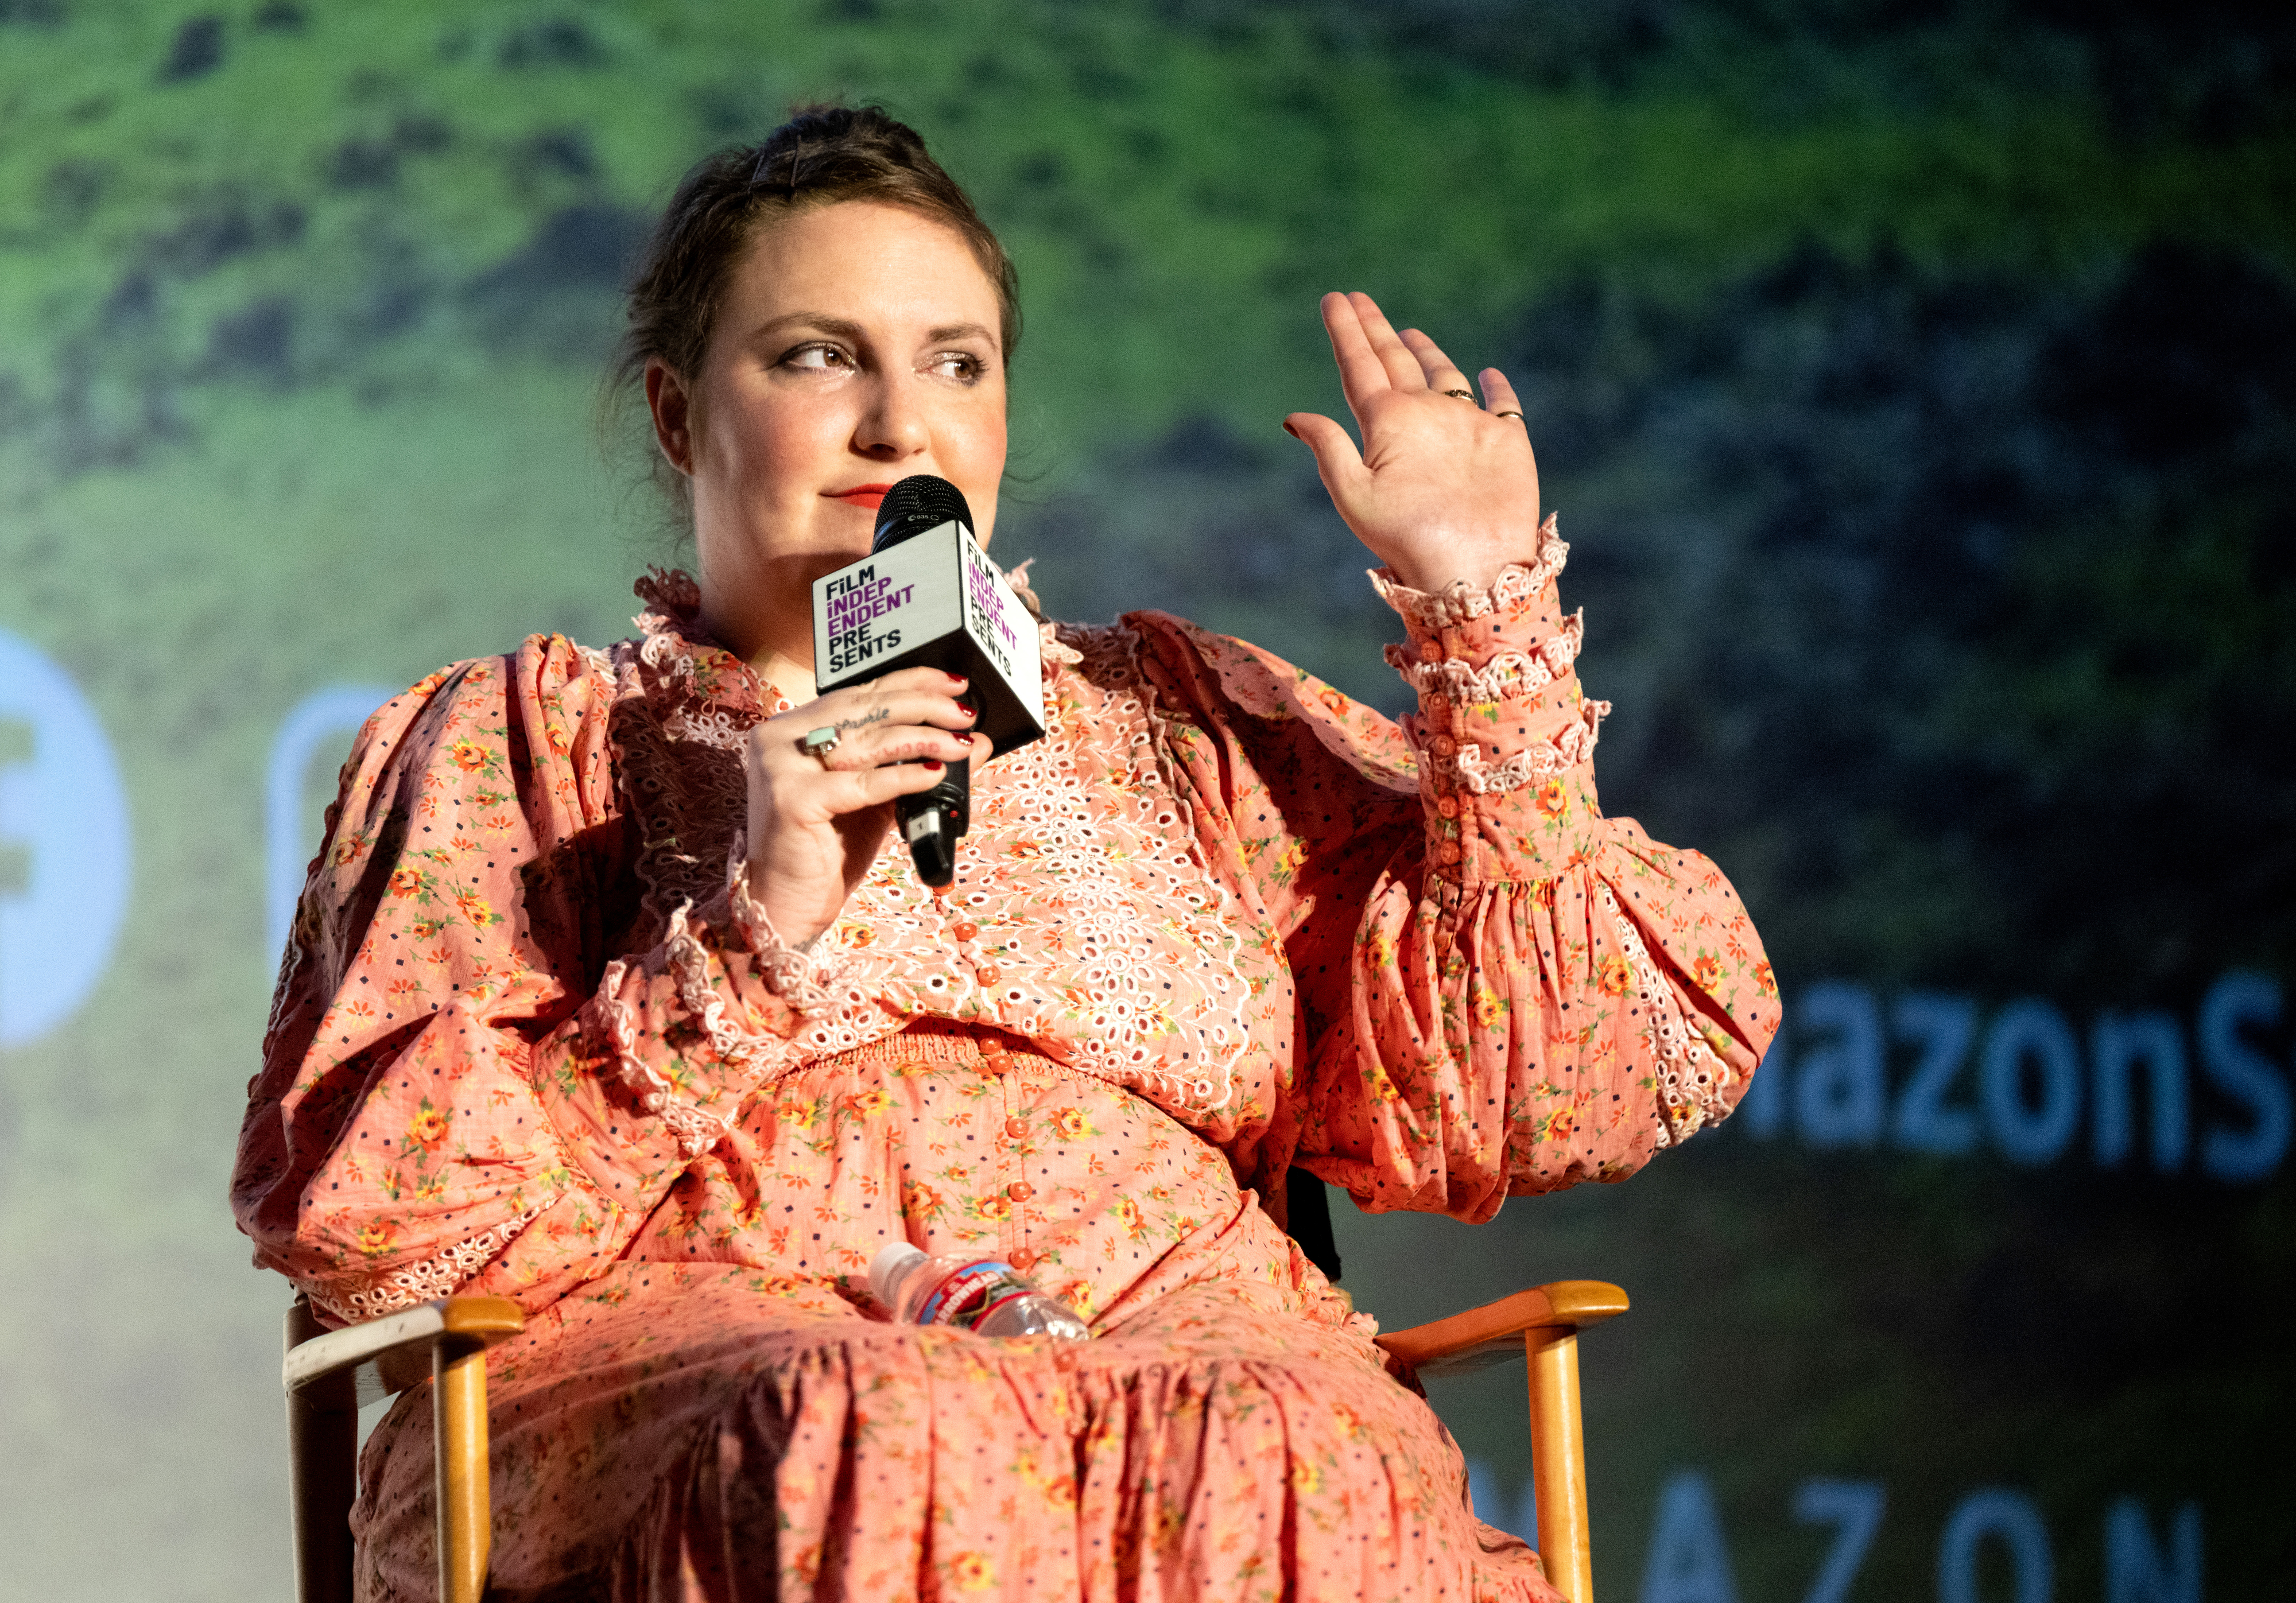 Lena Dunham speaks at an event, wearing a floral long-sleeve dress, holding a microphone, and gesturing with her other hand